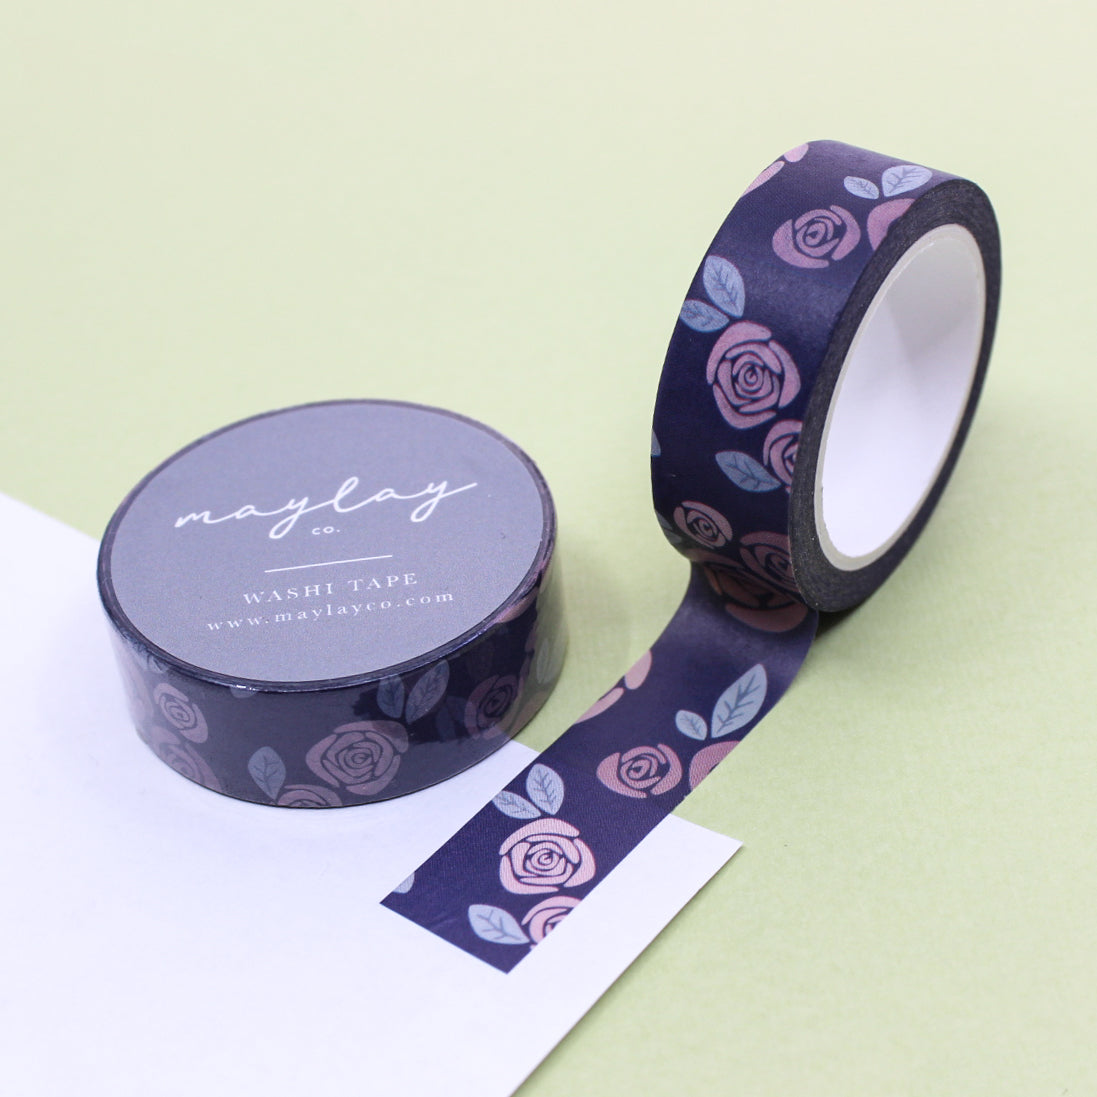 Modern Roses Floral Washi Tape with a contemporary design featuring vibrant roses, perfect for adding a stylish floral touch to your projects and crafts. This tape is from Maylay Co. and sold at BBB Supplies Craft Shop.